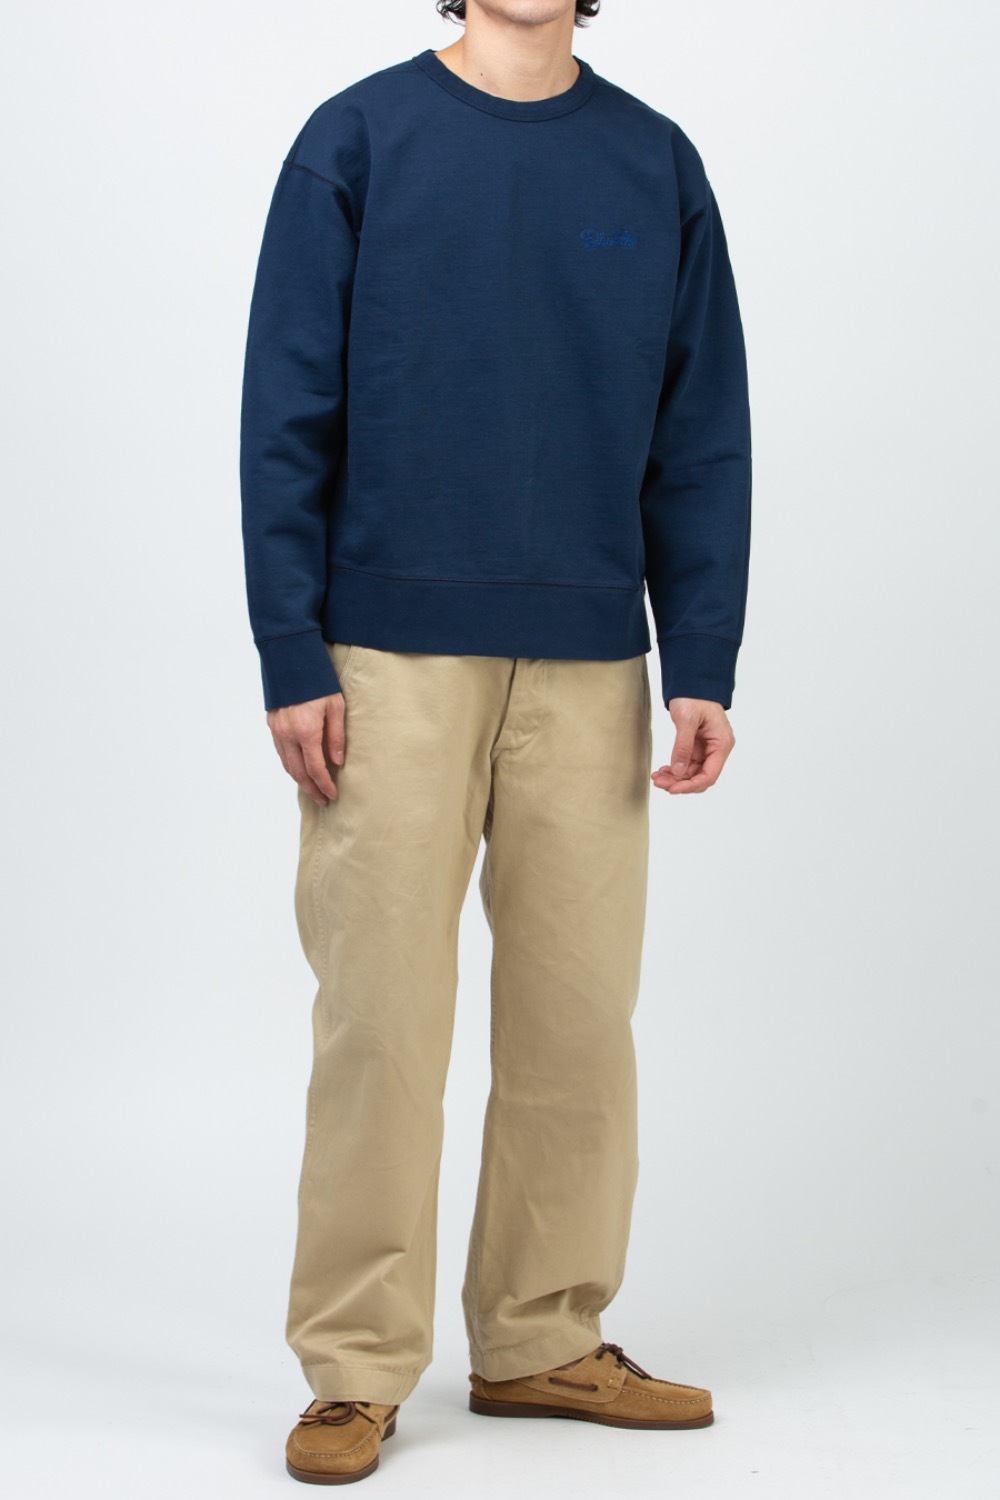 (CARRY OVER) NAVY CHAIN-STITCHED COTTON SWEATSHIRT